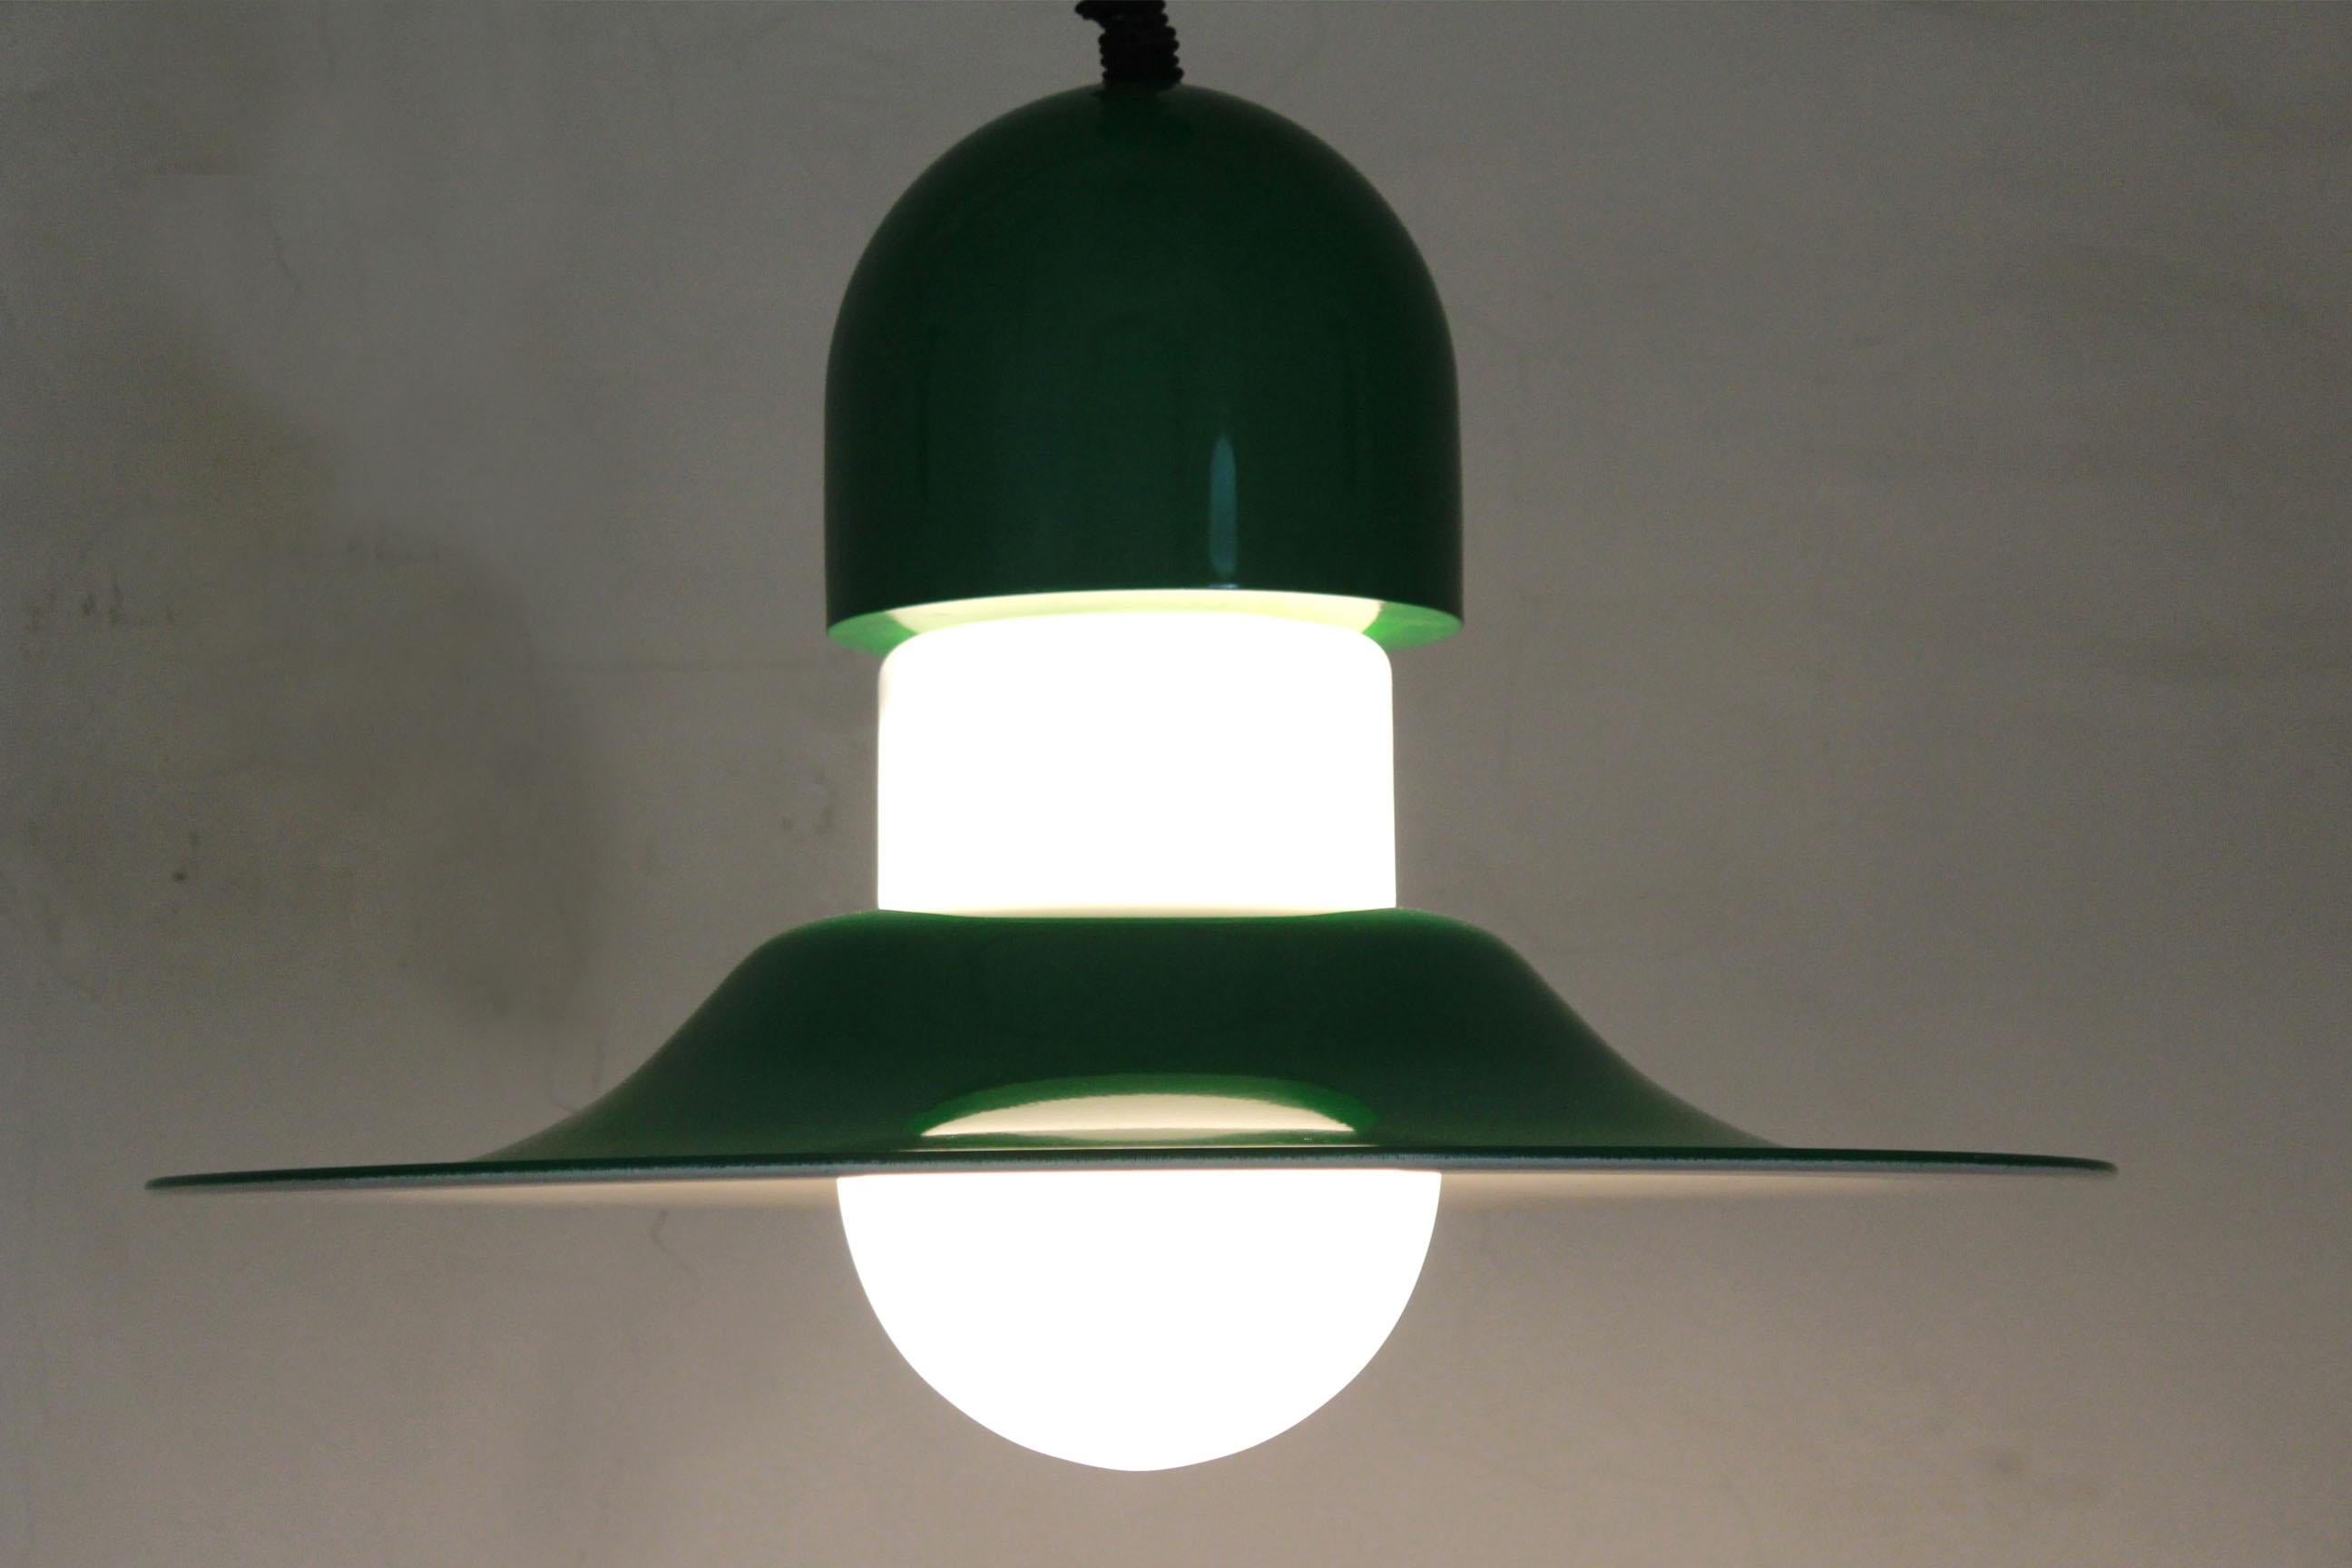 Vintage Green Pendant by Vico Magistretti for Artemide, Italy 1970s
A rare 1970s vintage pendant by Vico Magistretti designer for Artemide. Bicolor structure (white and green) and extendible electrical wire (up to one metre). White opaline glass